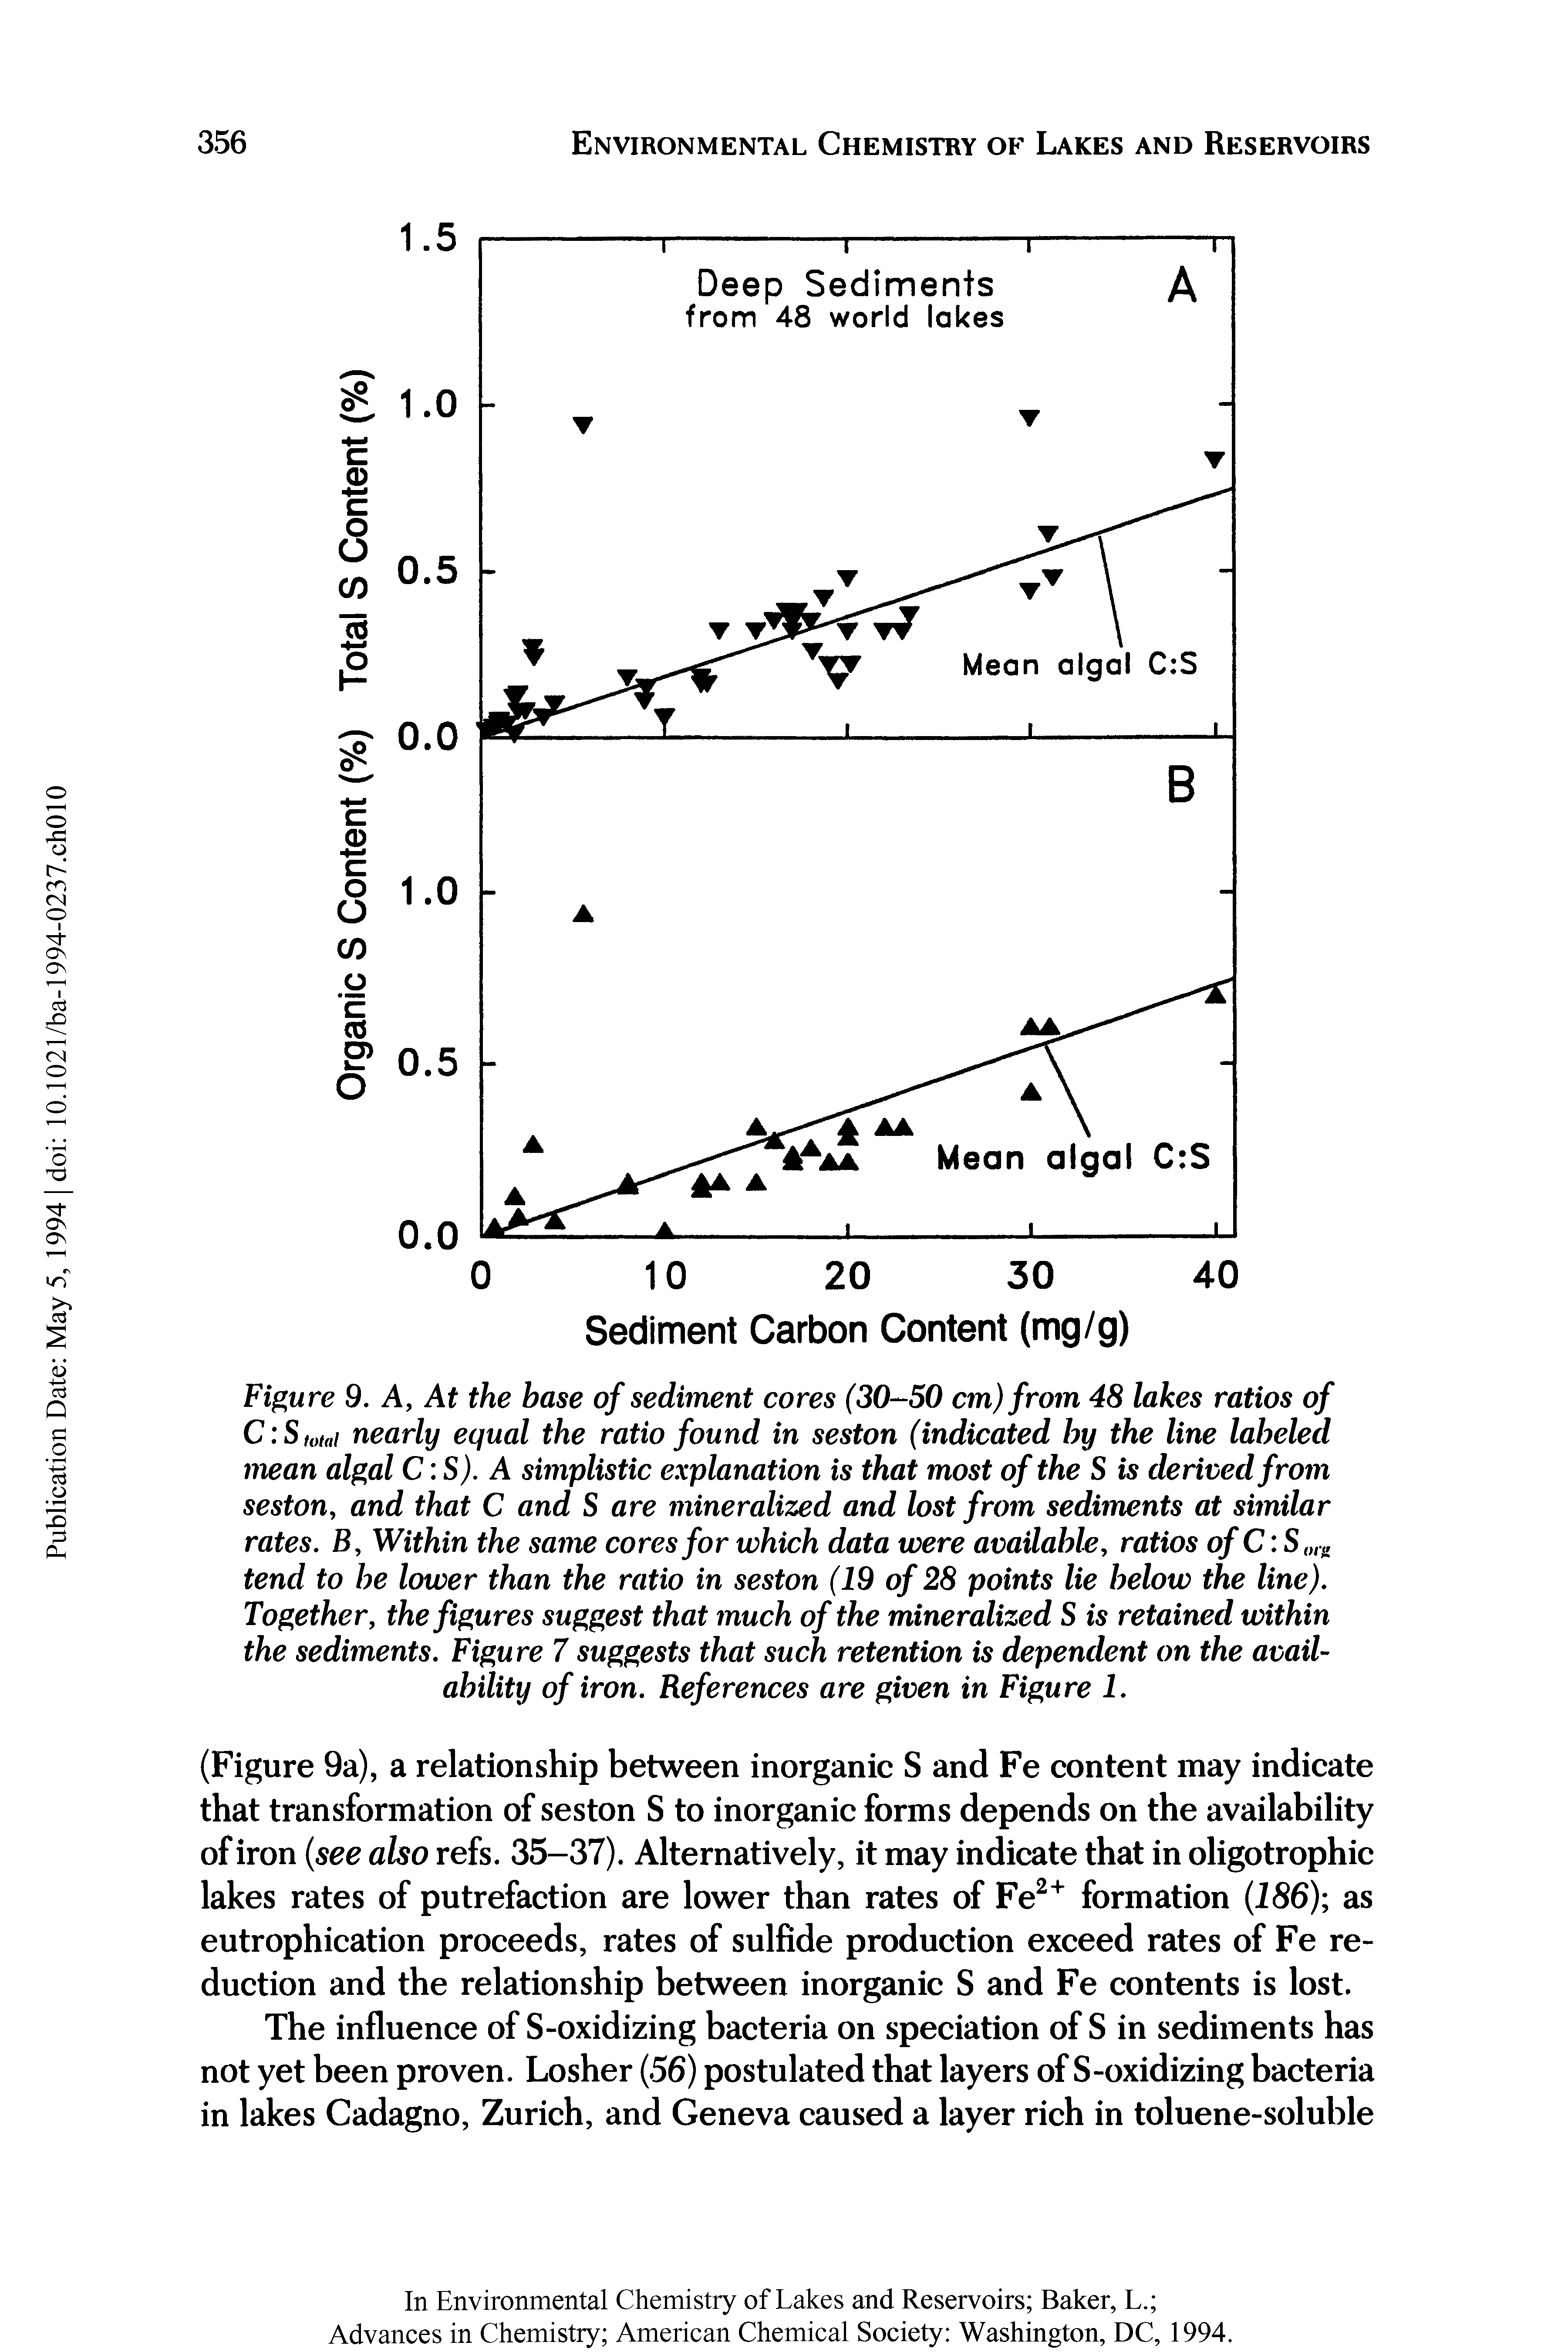 Figure 9. A, At the base of sediment cores (30-50 cm) from 48 lakes ratios of C SMat nearly equal the ratio found in seston (indicated by the line labeled mean algal C S). A simplistic explanation is that most of the S is derived from seston, and that C and S are mineralized and lost from sediments at similar rates. B, Within the same cores for which data were available, ratios of C S oni tend to be lower than the ratio in seston (19 of 28 points lie below the line). Together, the figures suggest that much of the mineralized S is retained within the sediments. Figure 7 suggests that such retention is dependent on the avail-ability of iron. References are given in Figure 1.